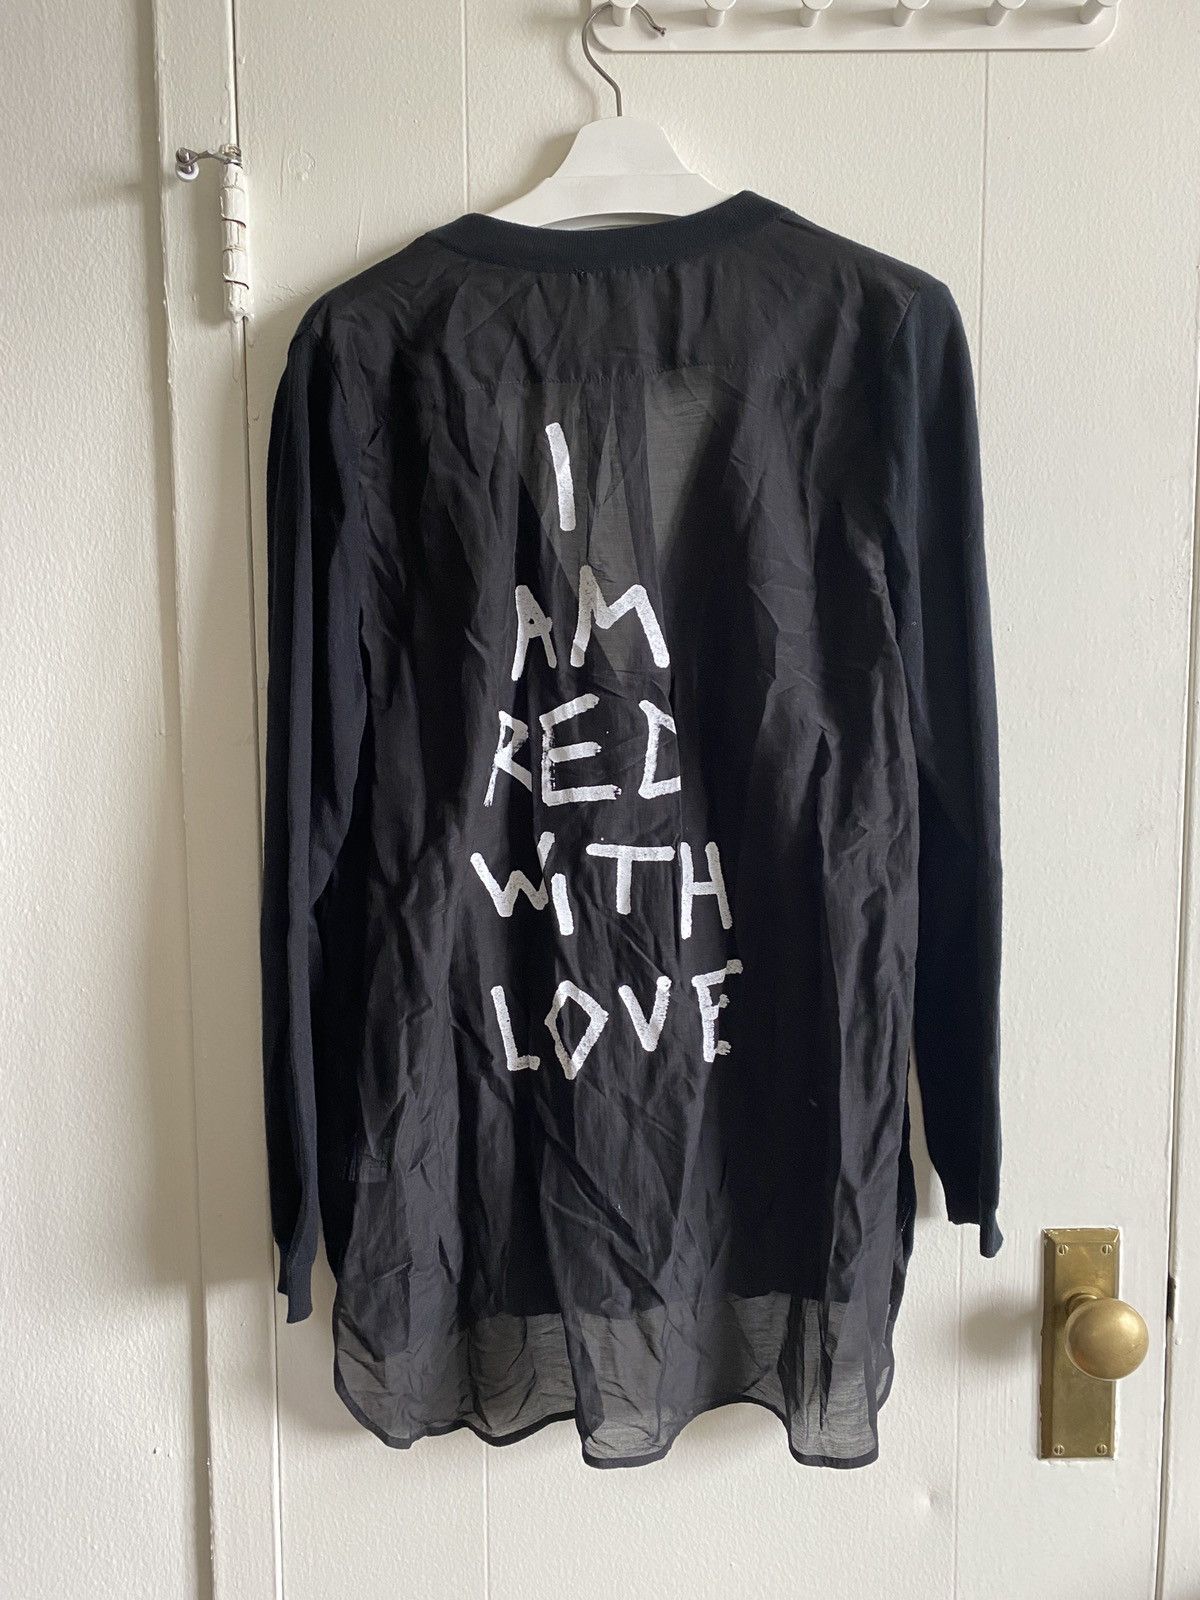 Ann Demeulemeester Ann Demeulemeester I Am Red With Love Cardigan Sweater Size US M / EU 48-50 / 2 - 1 Preview